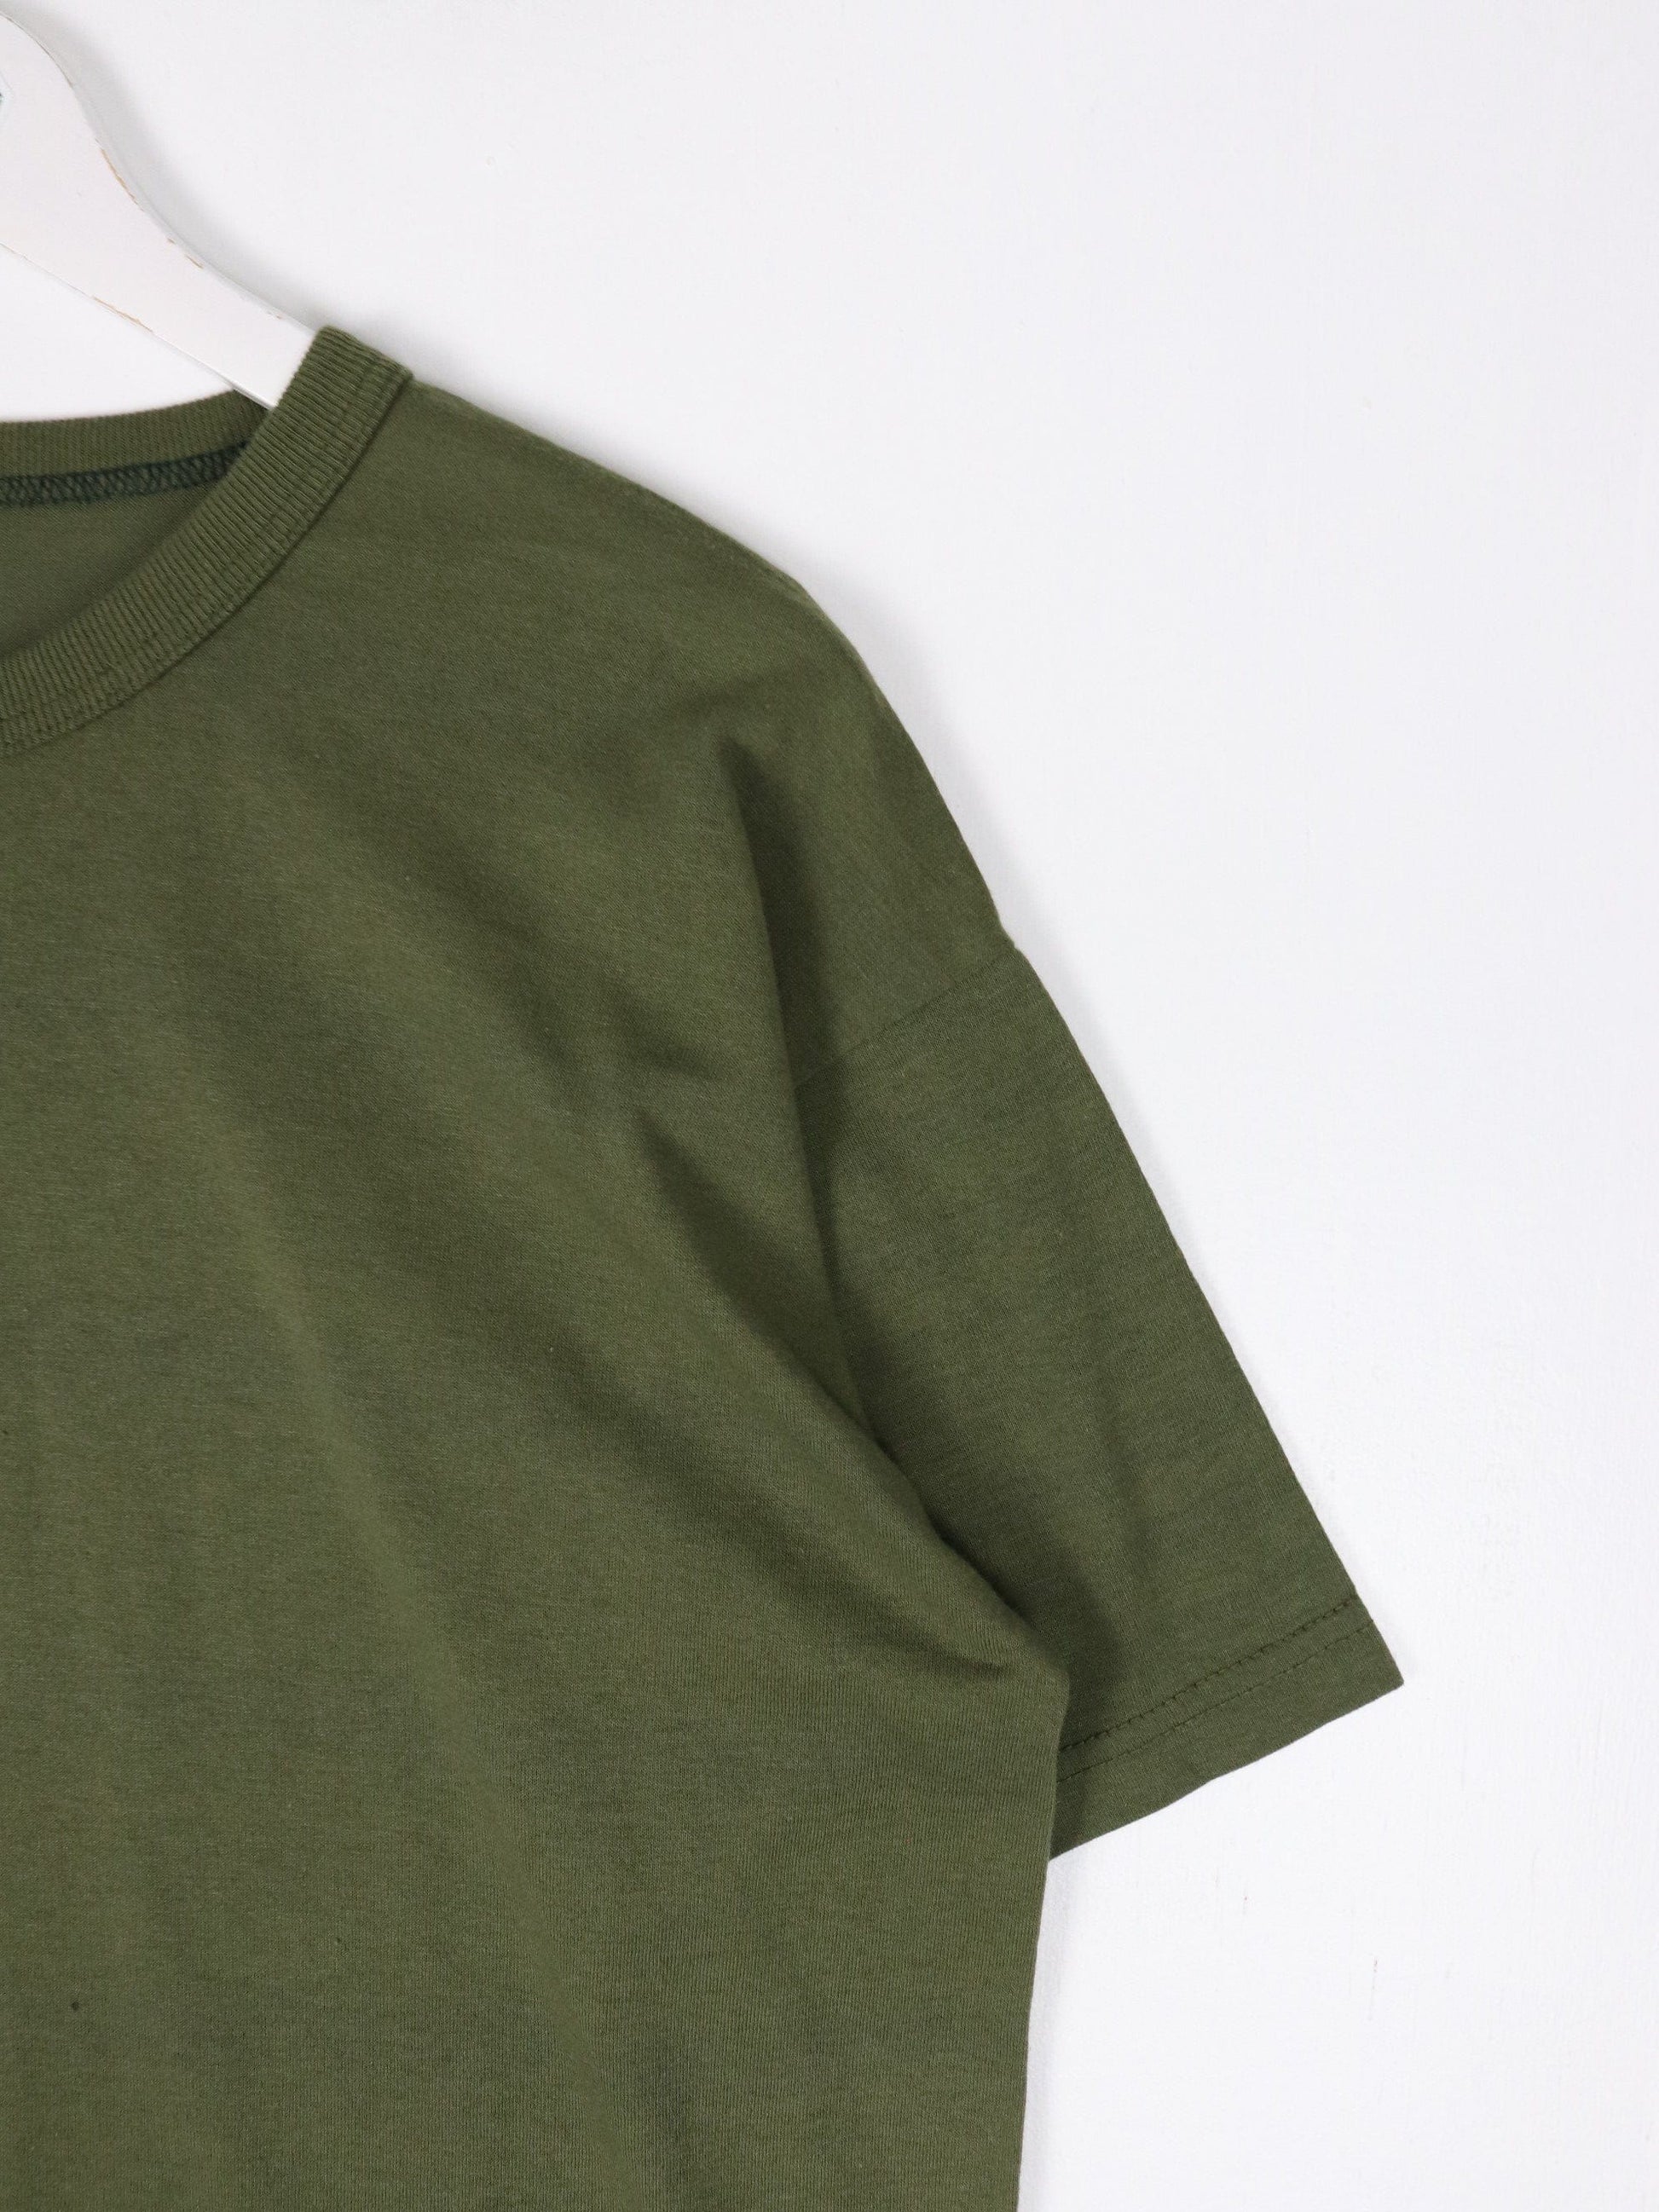 Other T-Shirts & Tank Tops Vintage Blank T Shirt Mens Large Army Green 90s